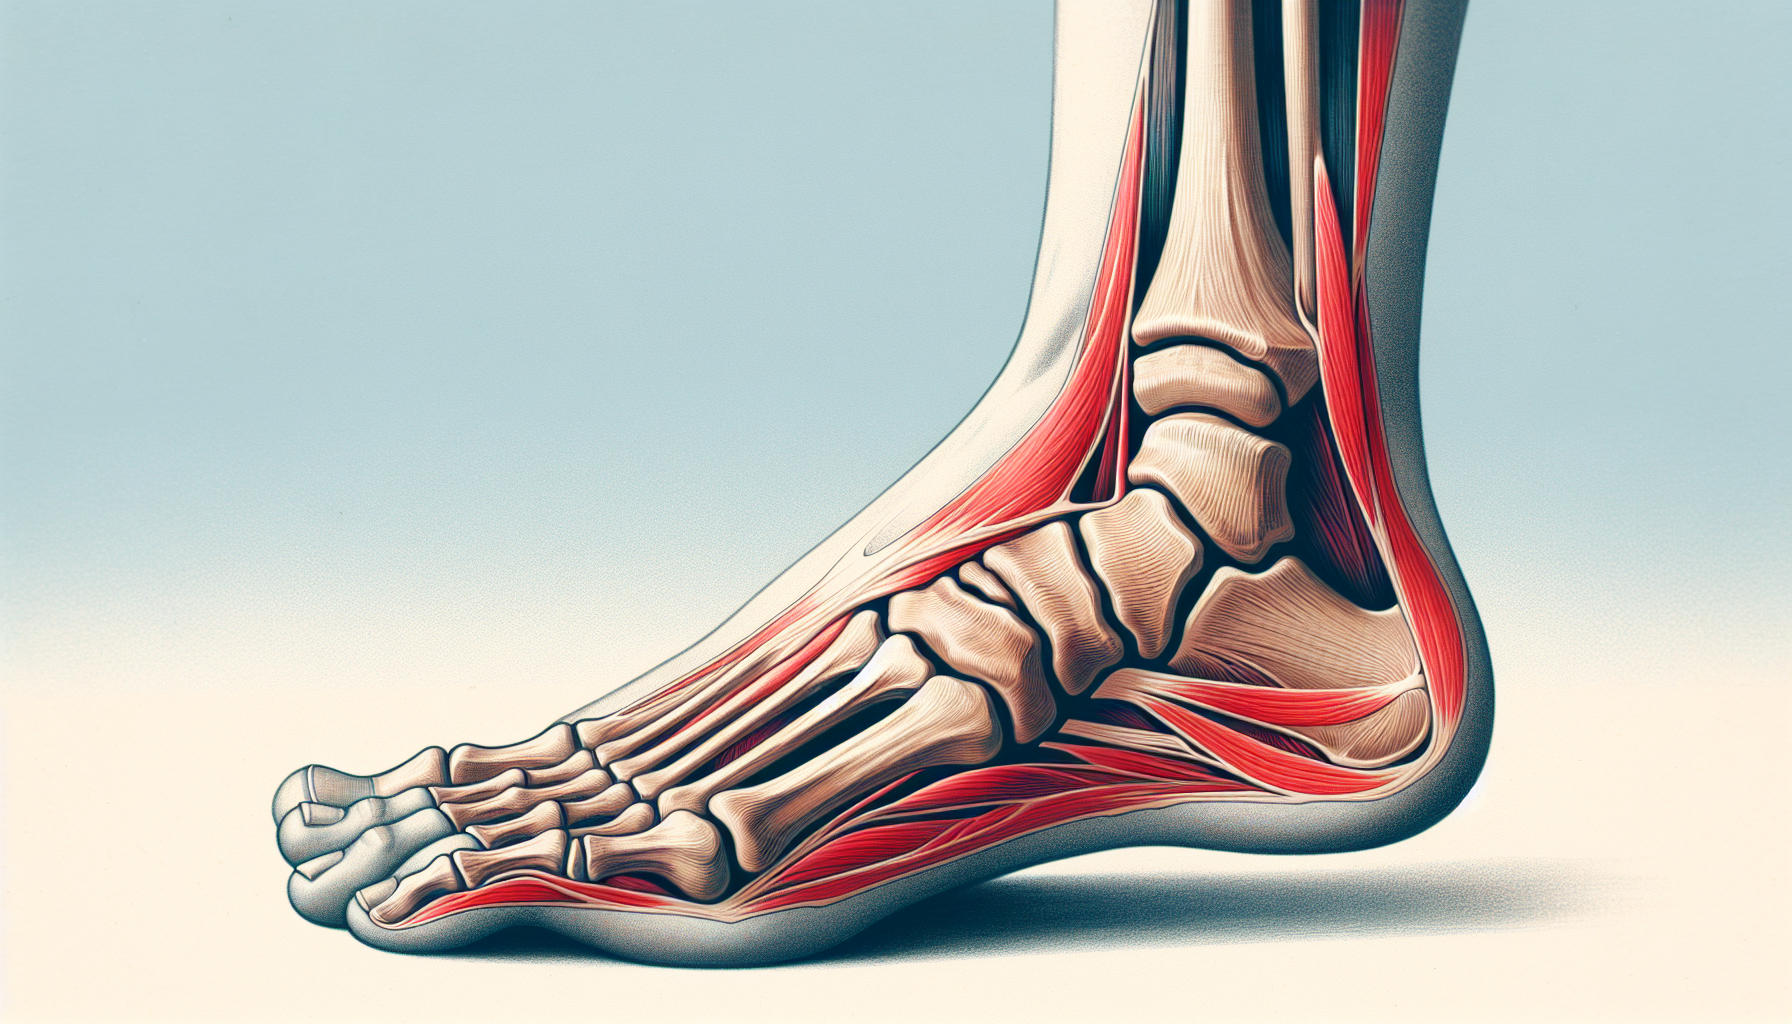 Illustration of foot anatomy with focus on heel and toes